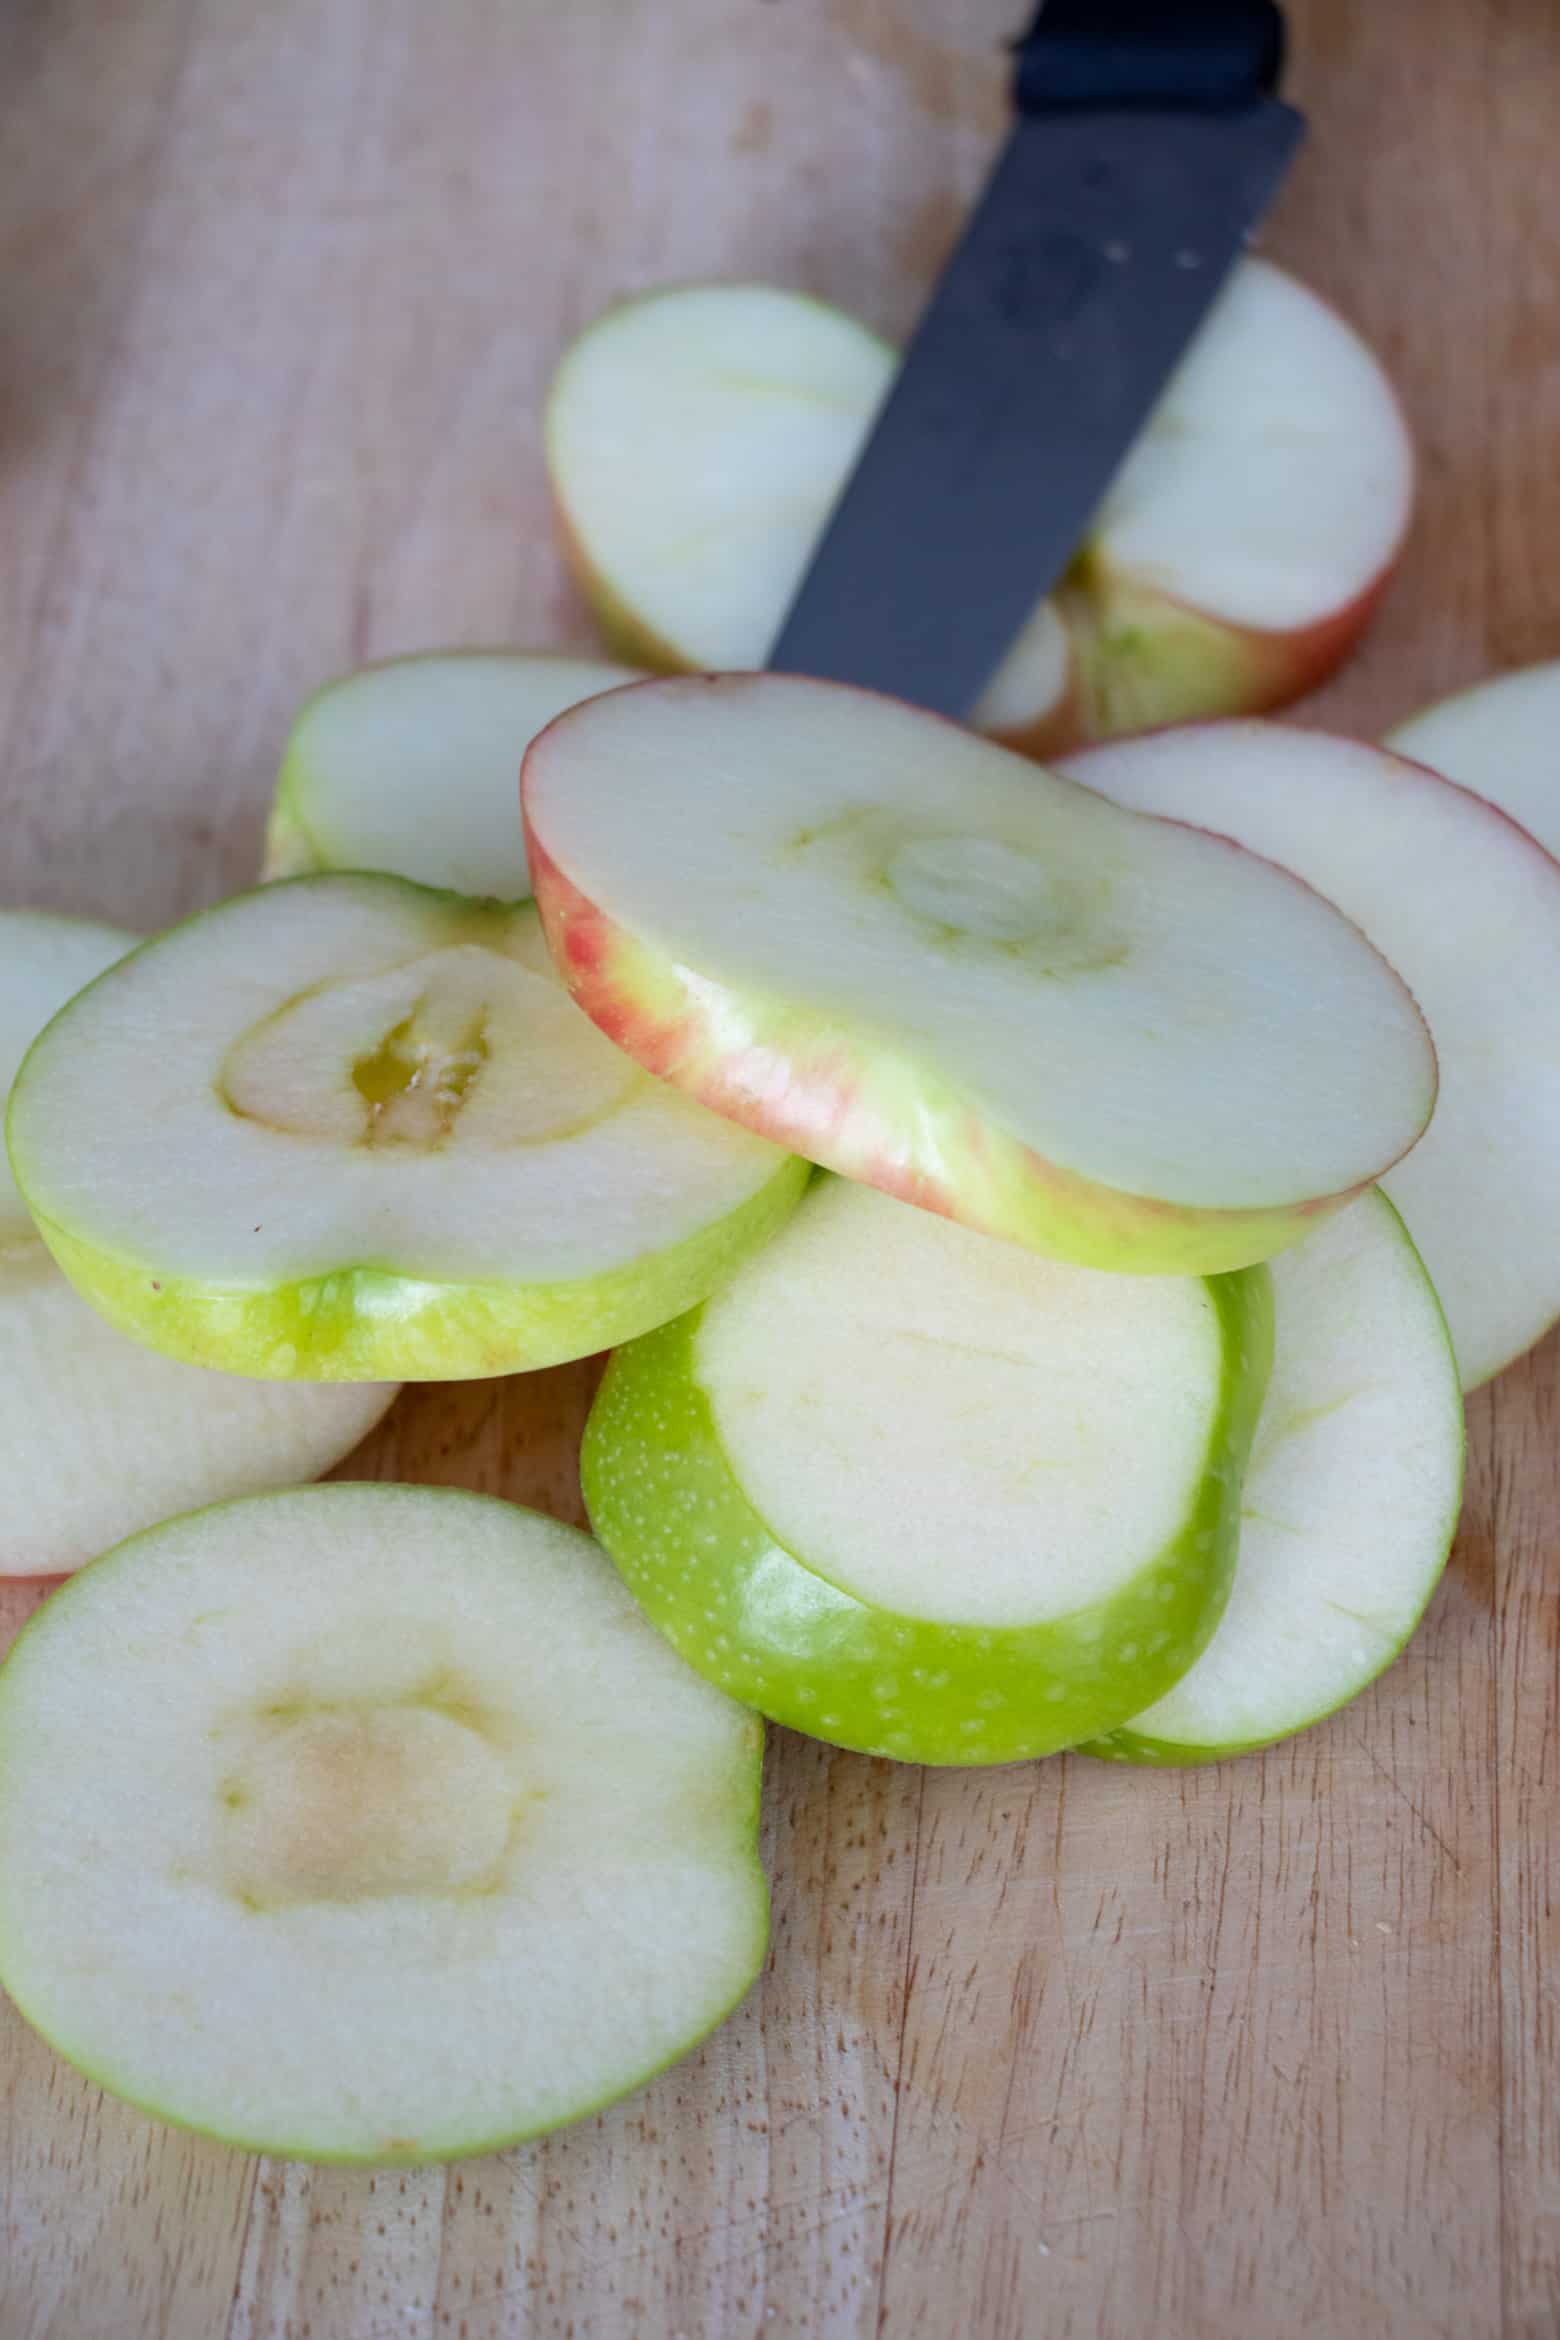 Sliced apples on a cutting board